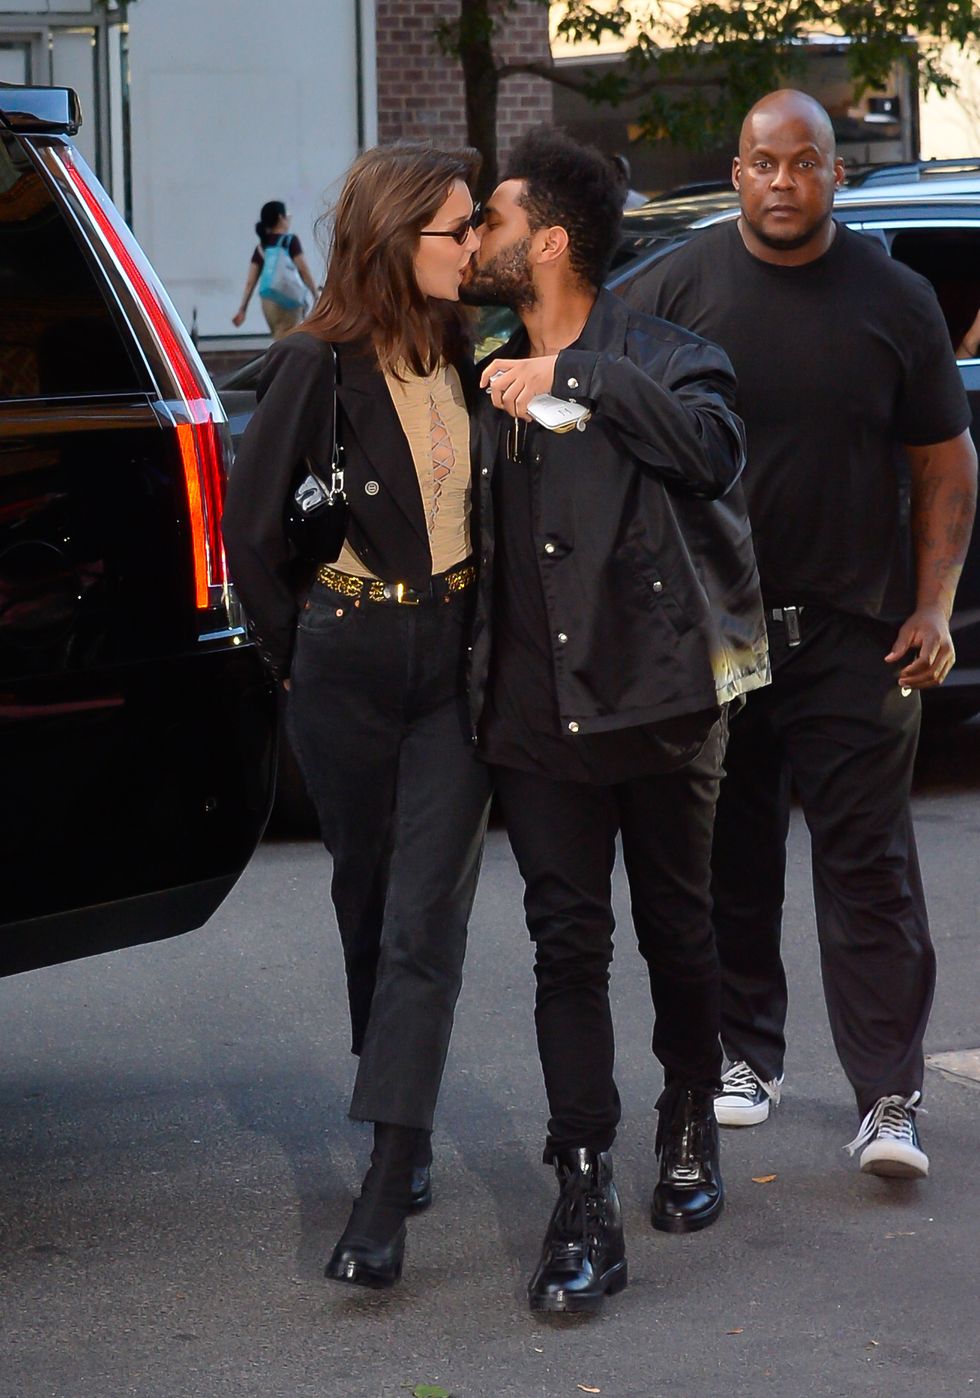 Bella Hadid and The Weeknd in New York